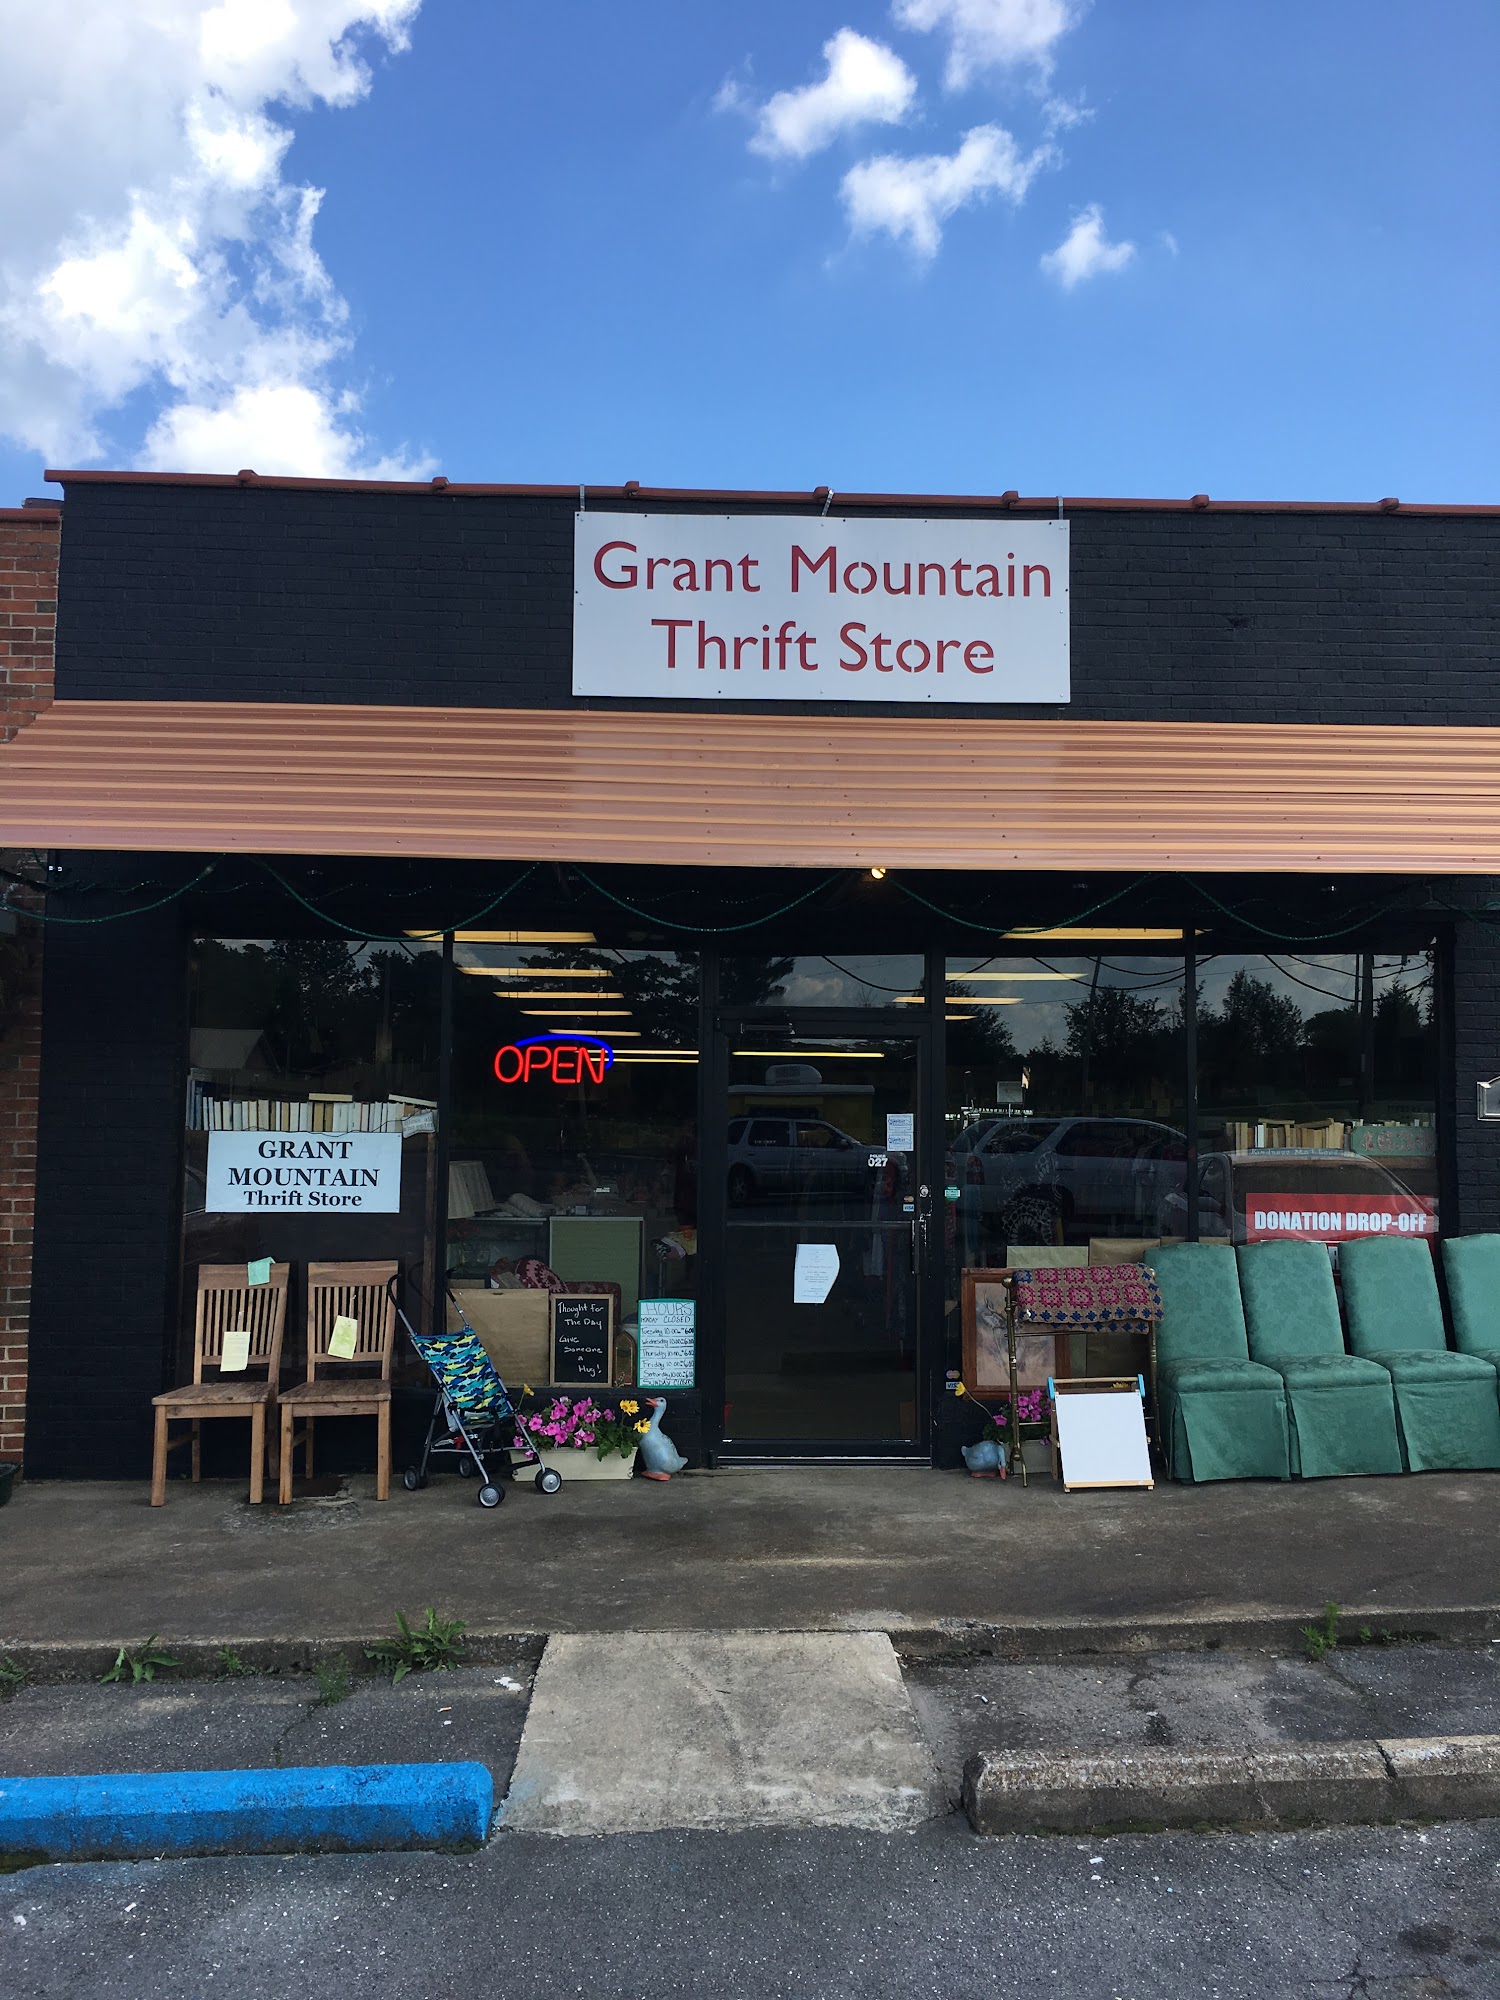 Grant Mountain Thrift Store